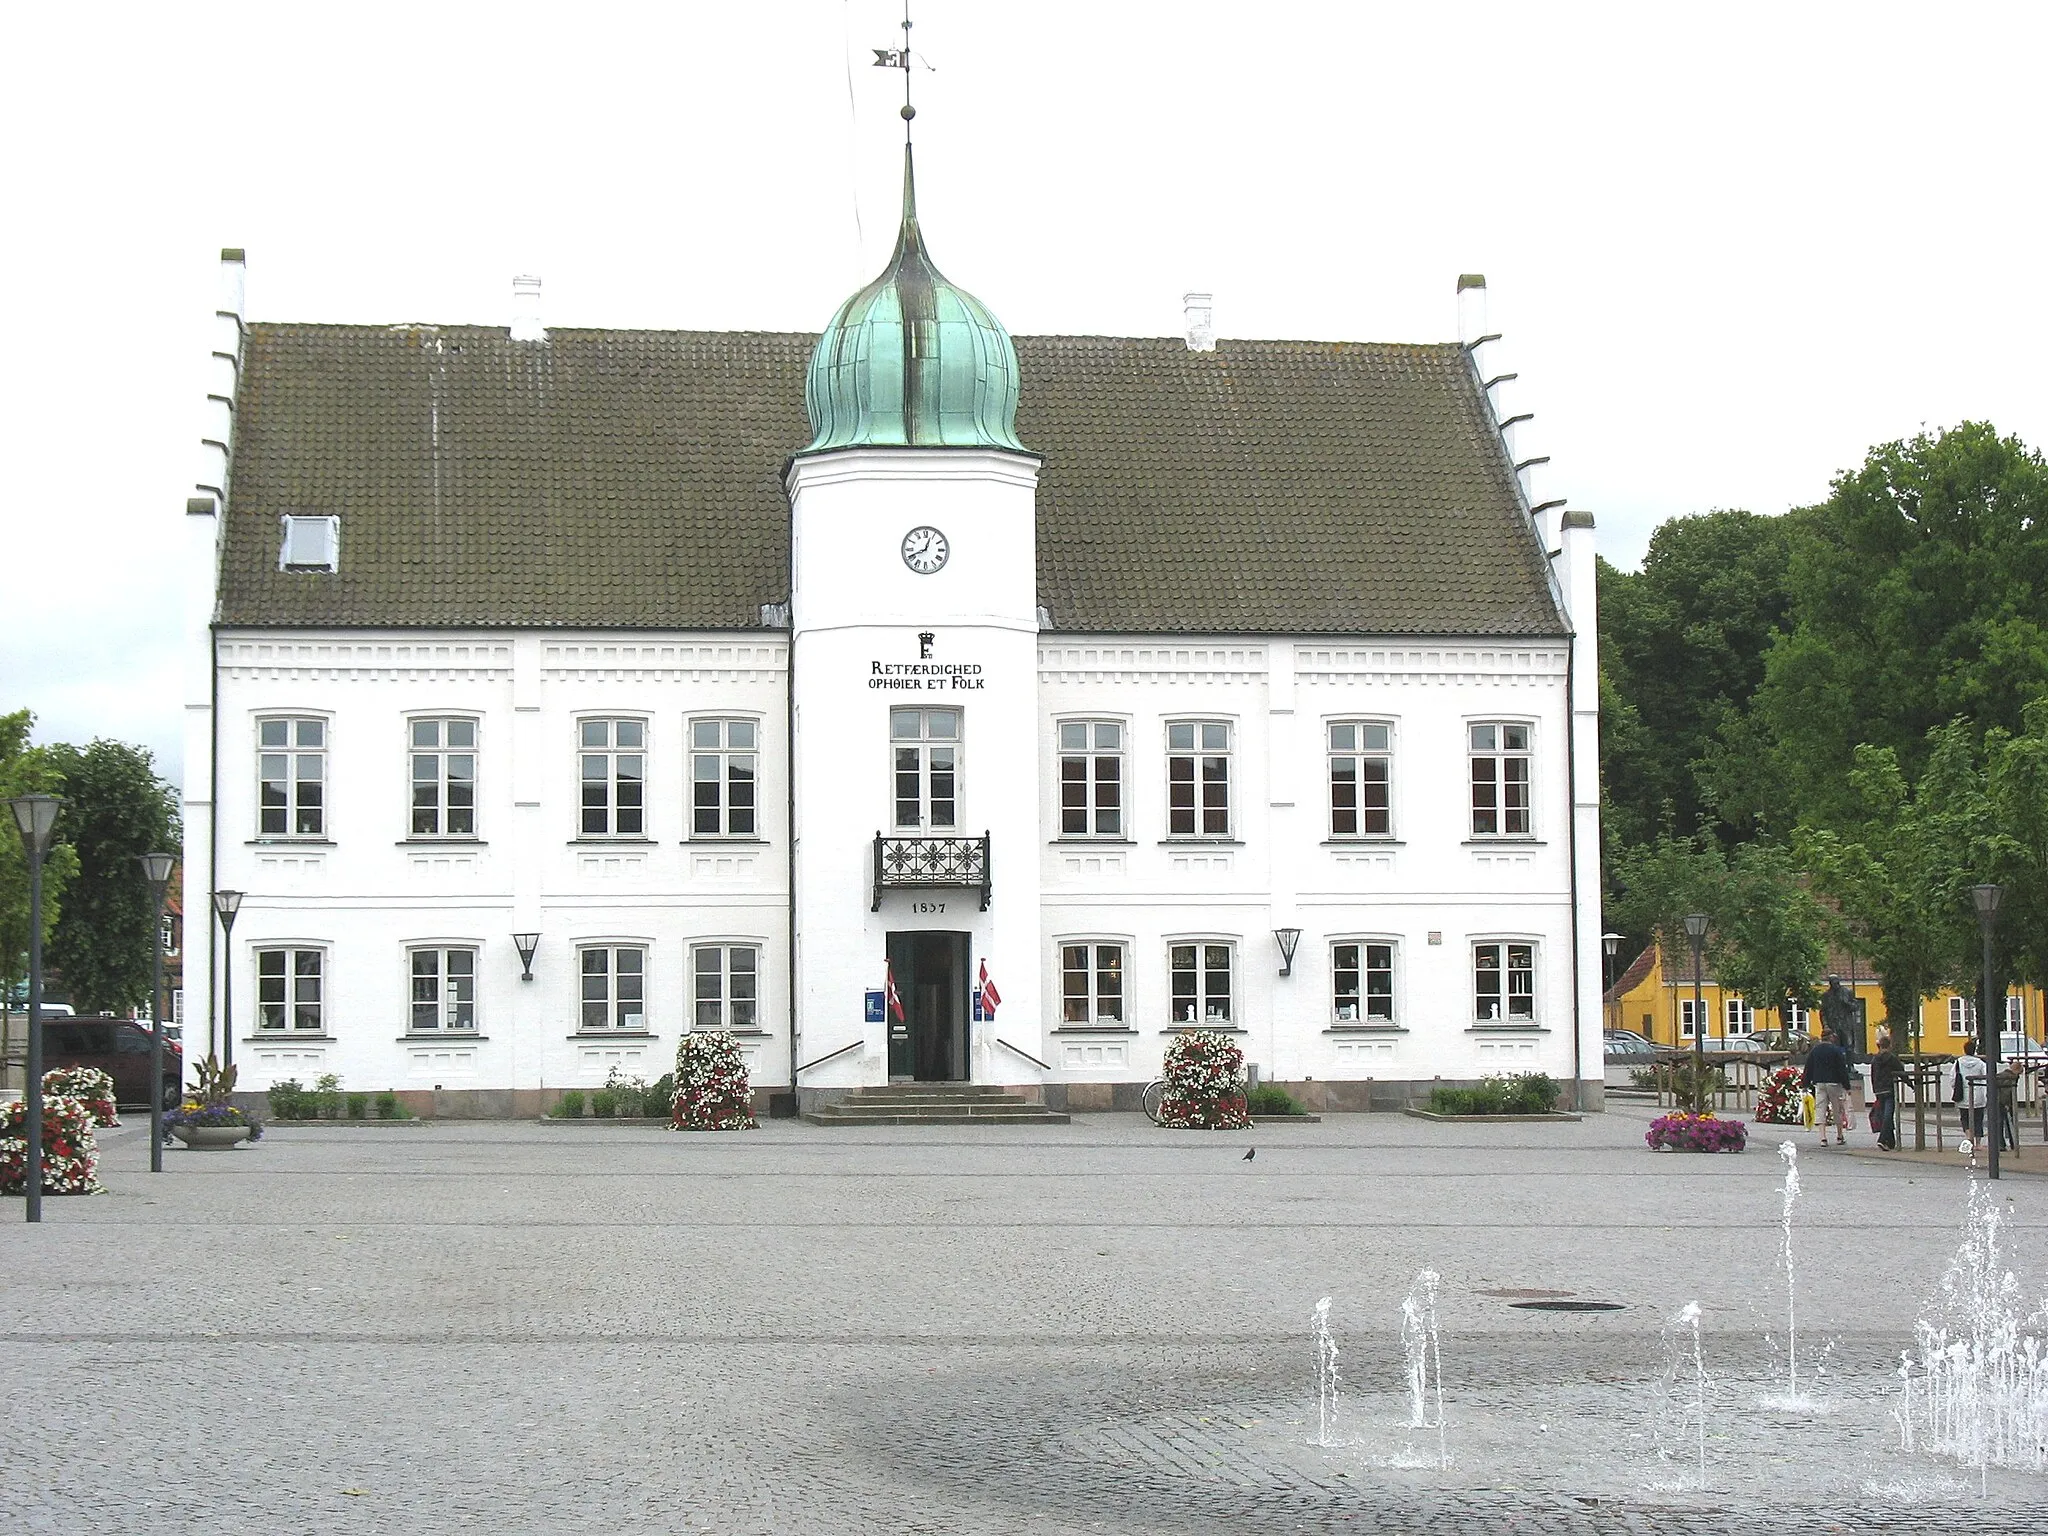 Photo showing: The town hall "Maribo Rådhus" in the town "Maribo". It is located on the island Lolland in east Denmark.